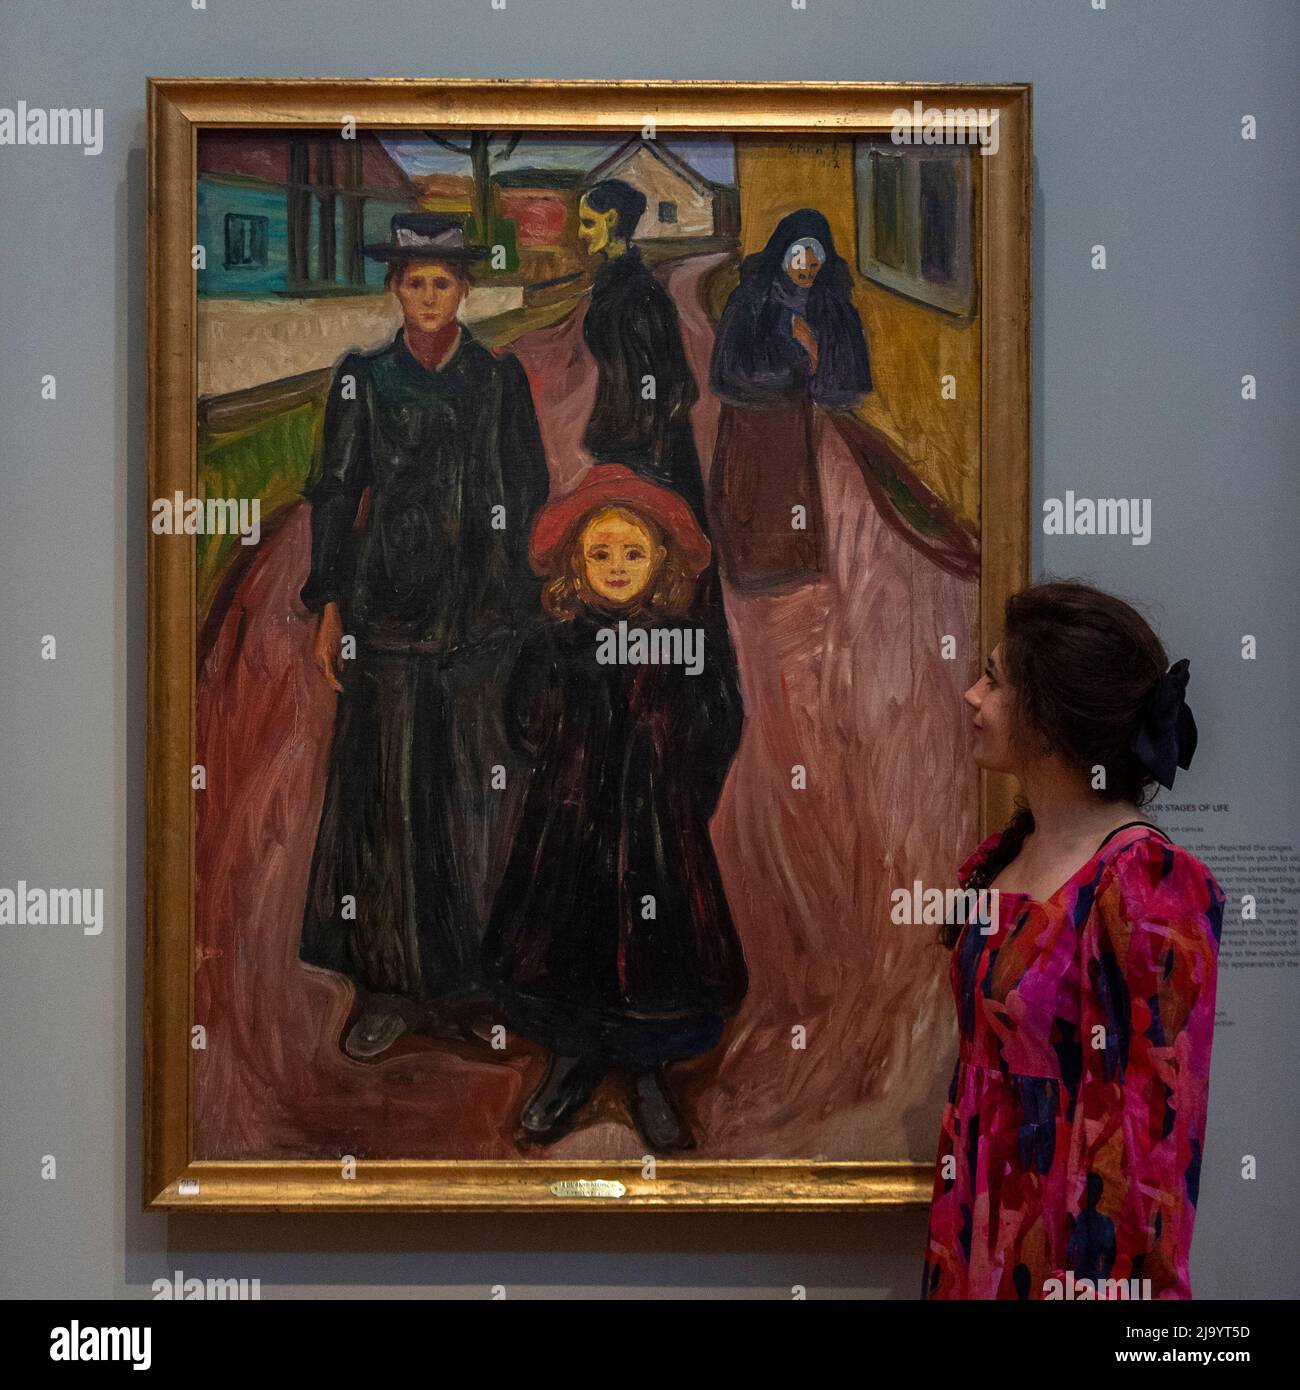 London, UK.  26 May 2022. 'Four stage of life', 1902, by Edvard Munch at the preview of “The Morgan Stanley Exhibition: Edvard Munch. Masterpieces from Bergen” at The Courtauld Gallery.  18 paintings by Munch from KODE Bergen Art Museum, Norway, home to one of the most important Munch collections in the world are shown together as a group outside Scandinavia for the first time.  The exhibition runs 27 May to 5 September 2022.  Credit: Stephen Chung / Alamy Live News Stock Photo